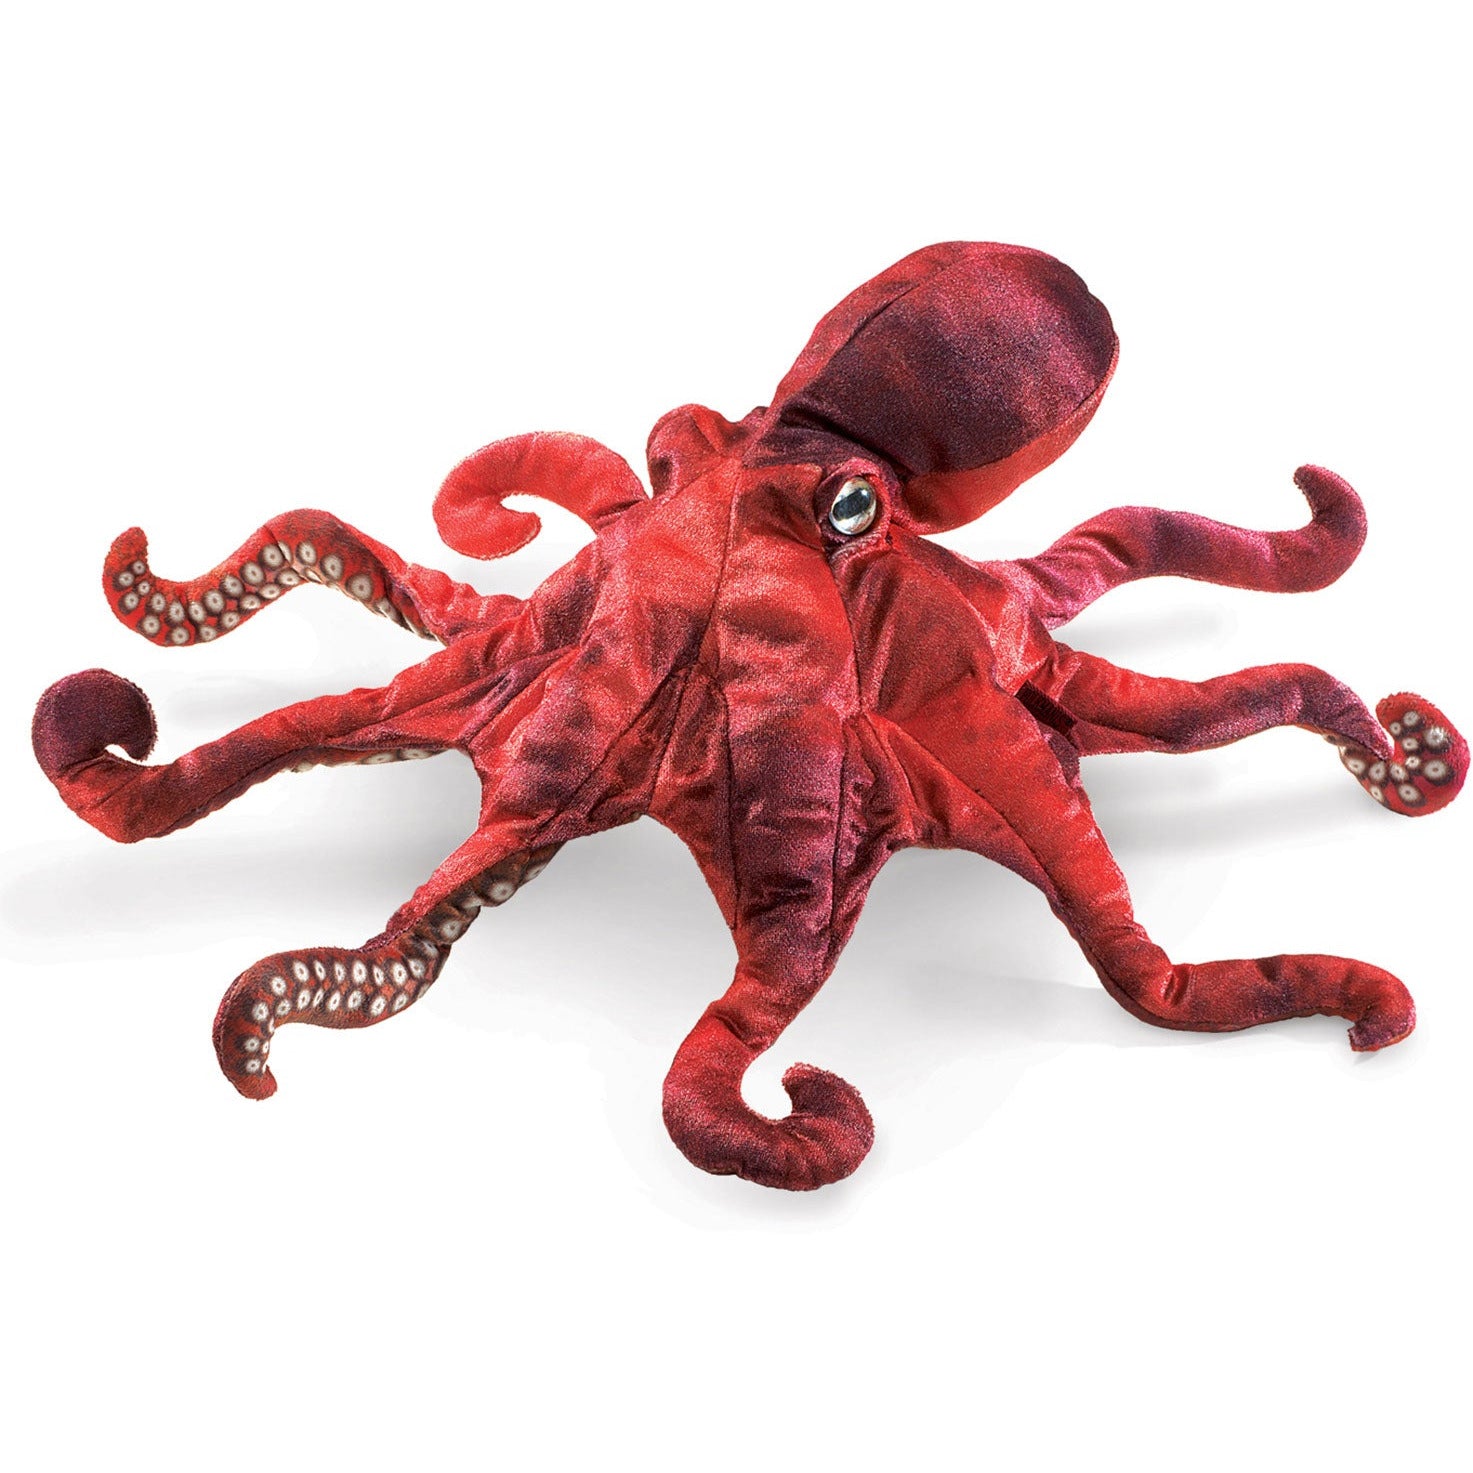 Folkmanis Puppets | Roter Oktopus / Red Octopus